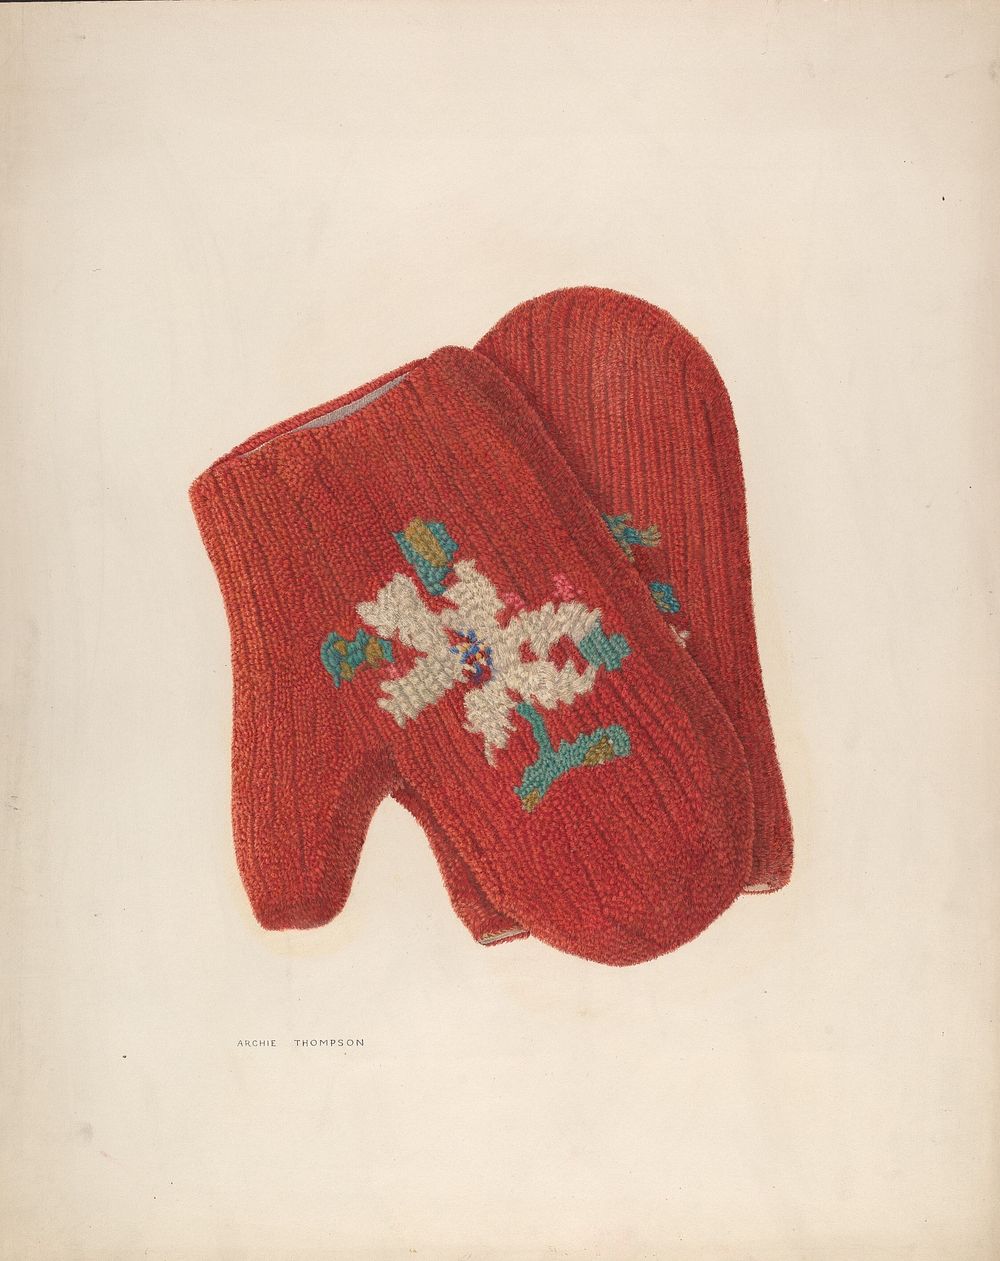 Mittens (1935&ndash;1942)  by Archie Thompson.  